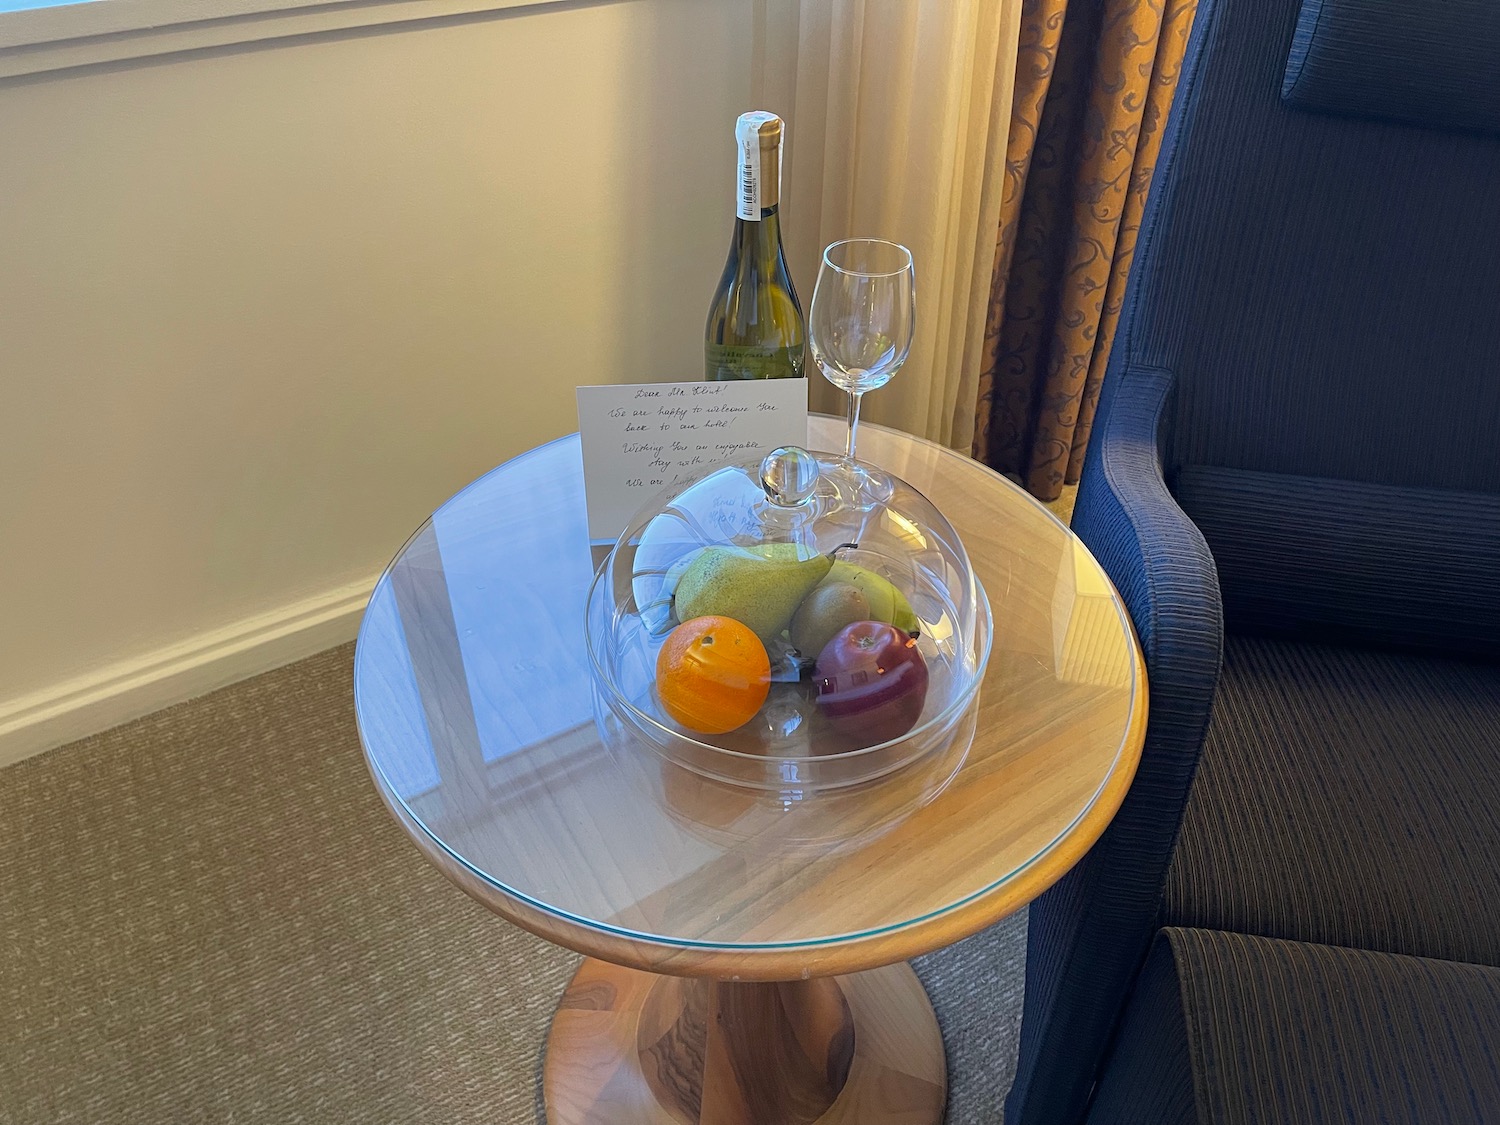 a glass bowl of fruit and a bottle of wine on a table